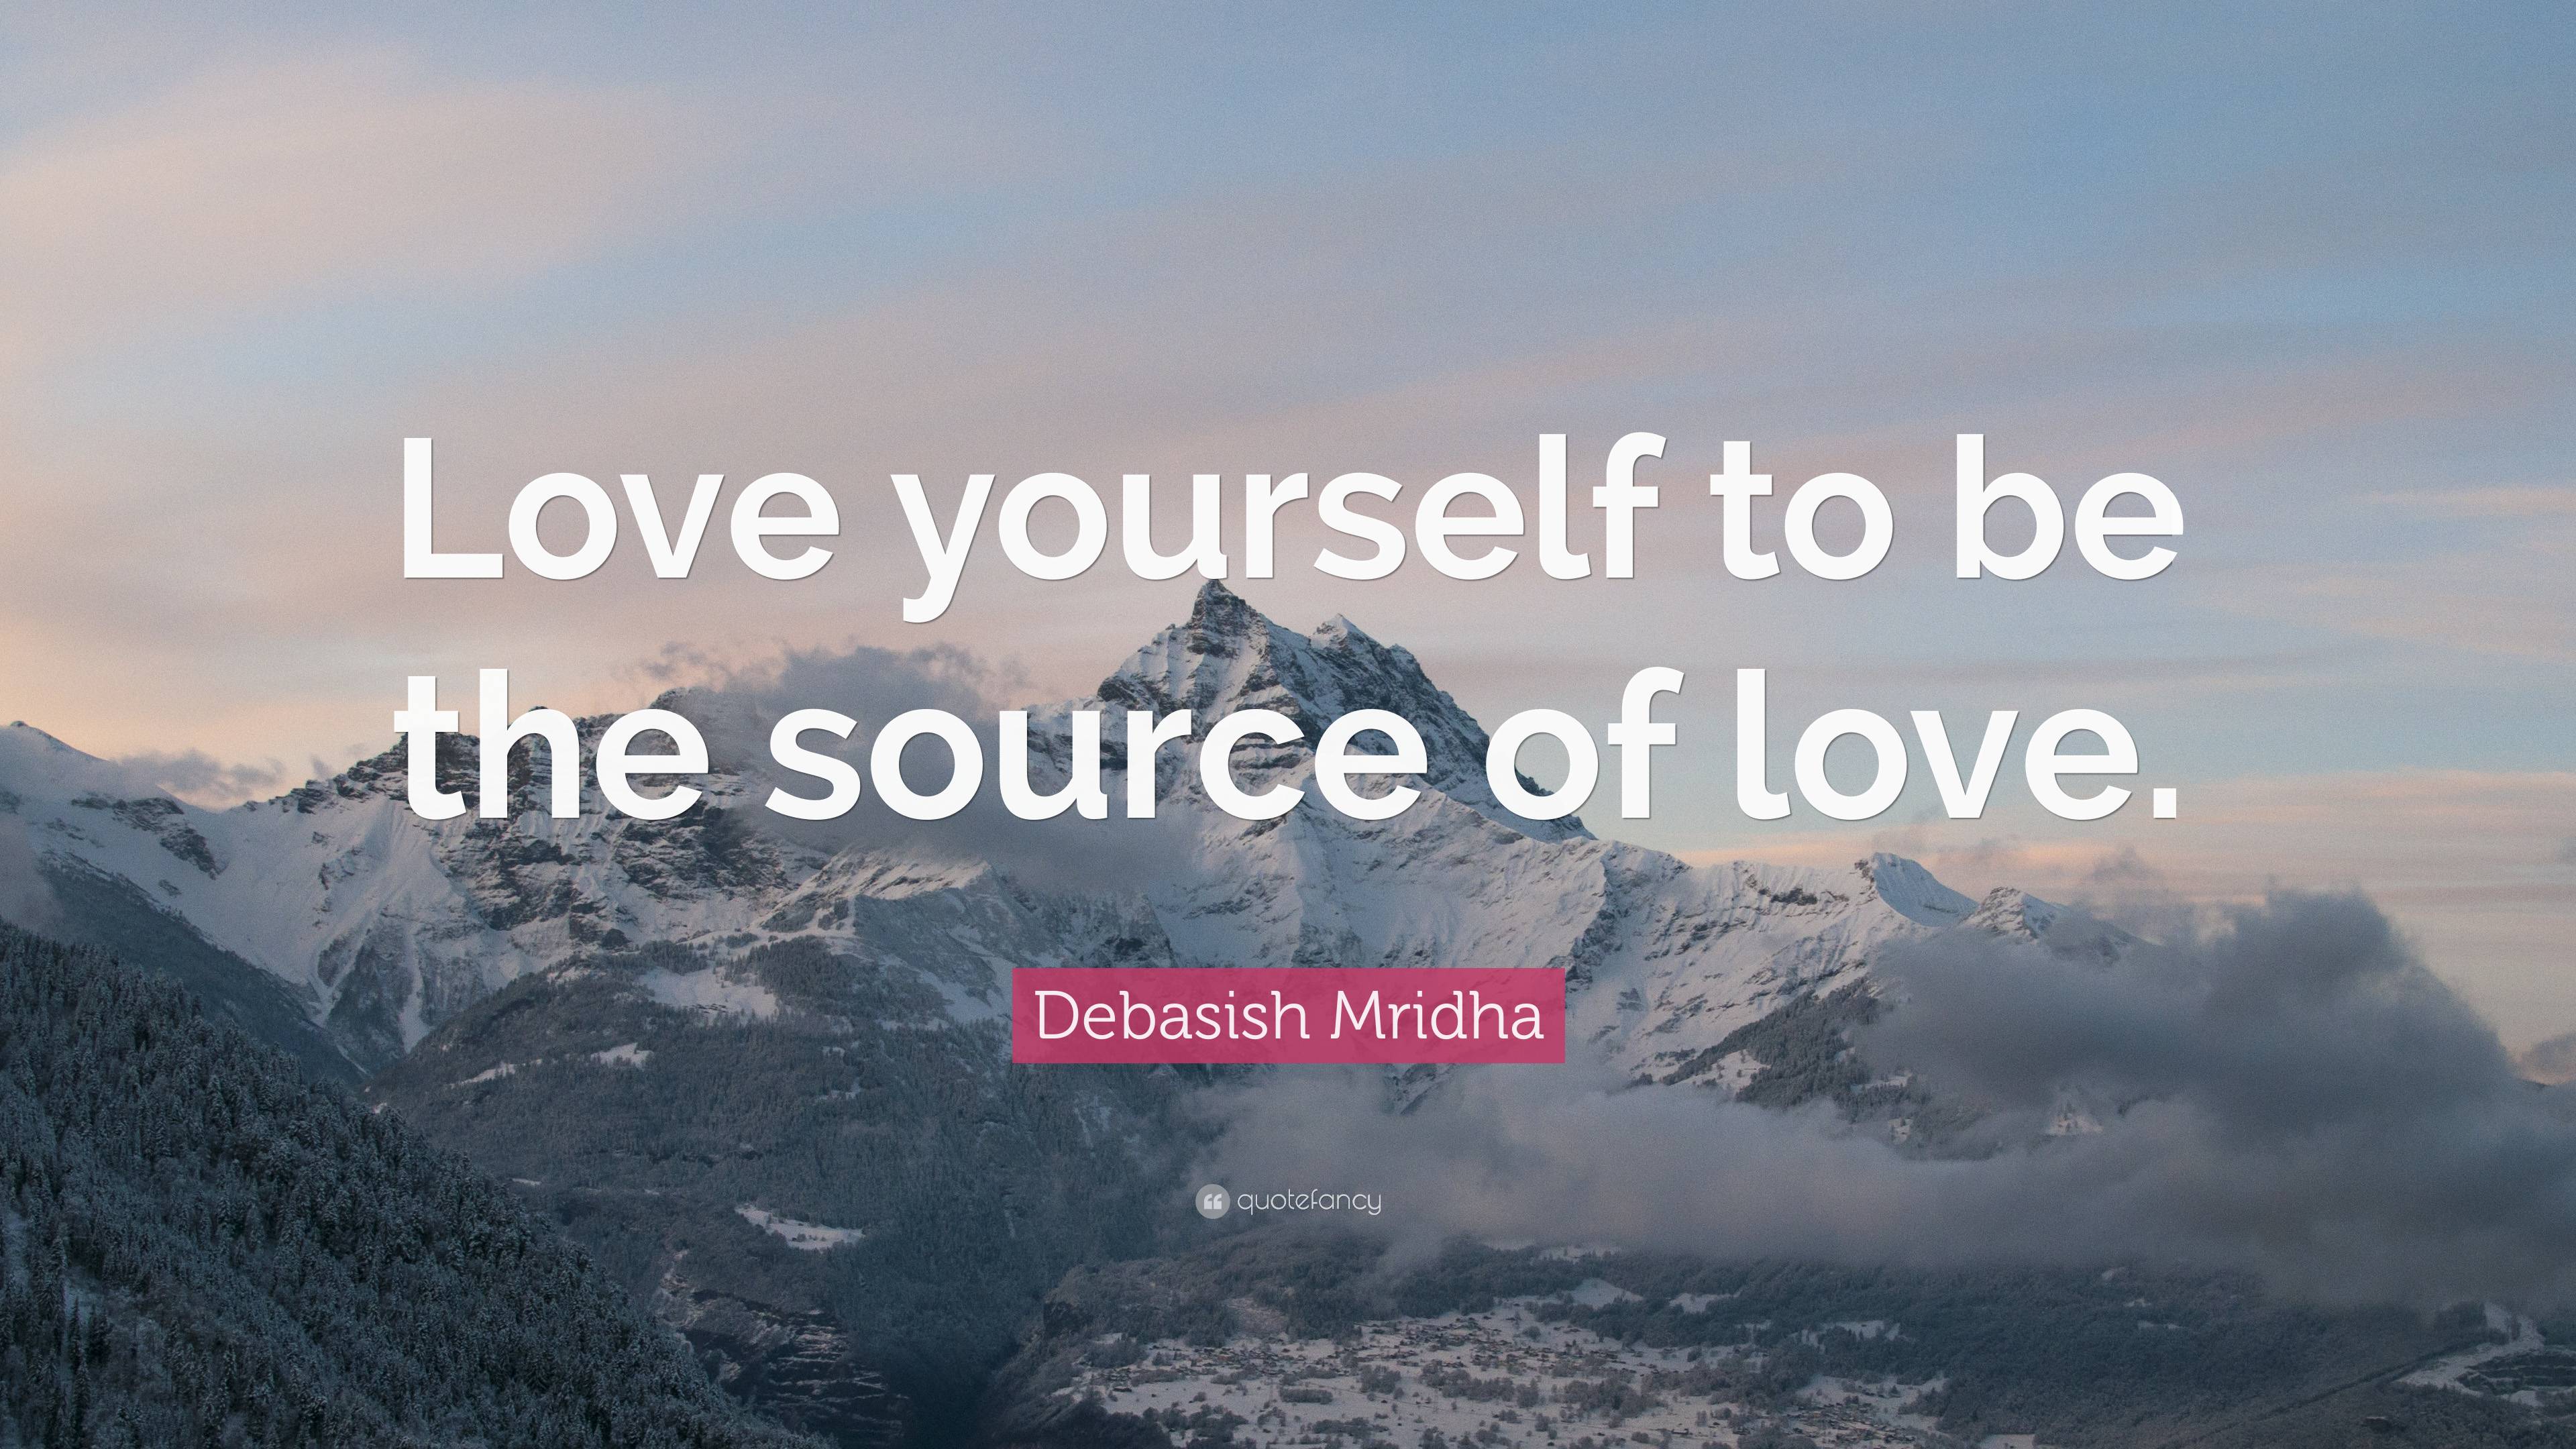 Debasish Mridha Quote: “Love yourself to be the source of love.”